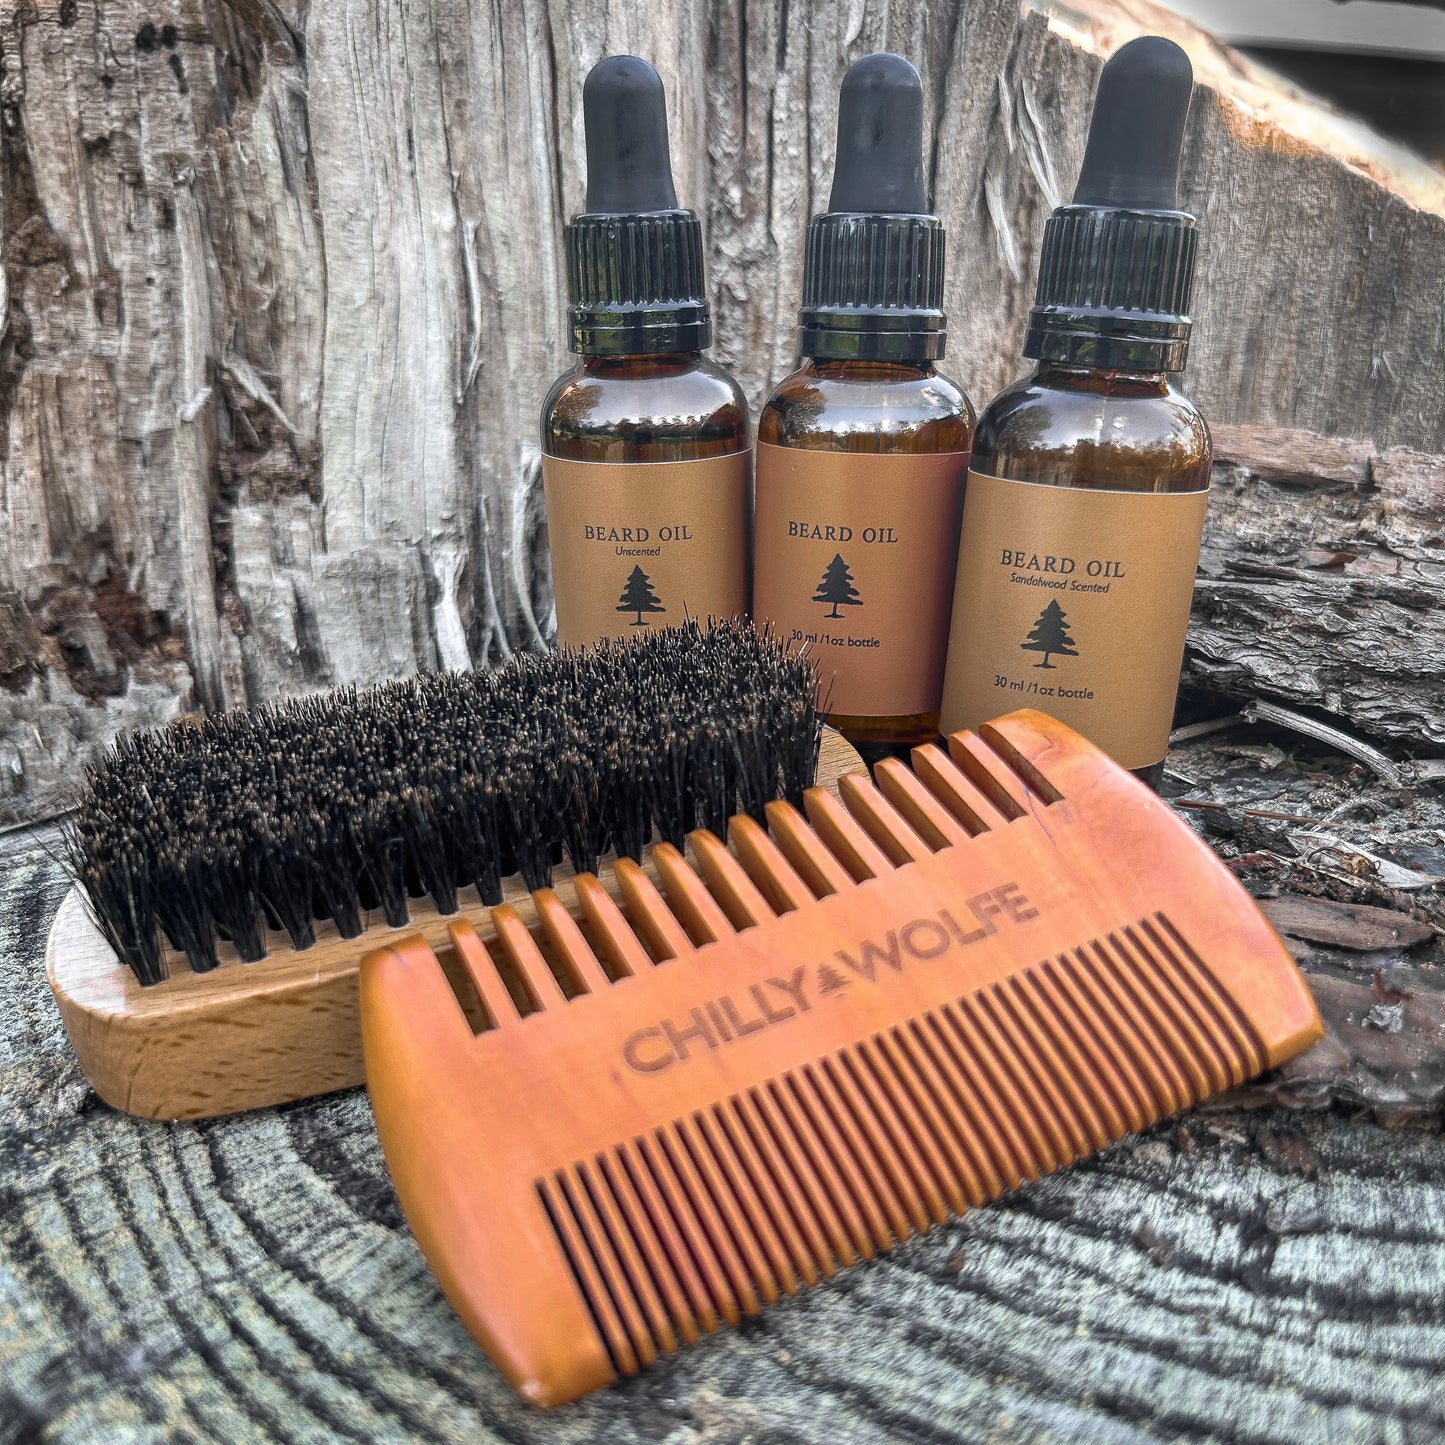 Chilly Wolfe Beard Oil - Unscented